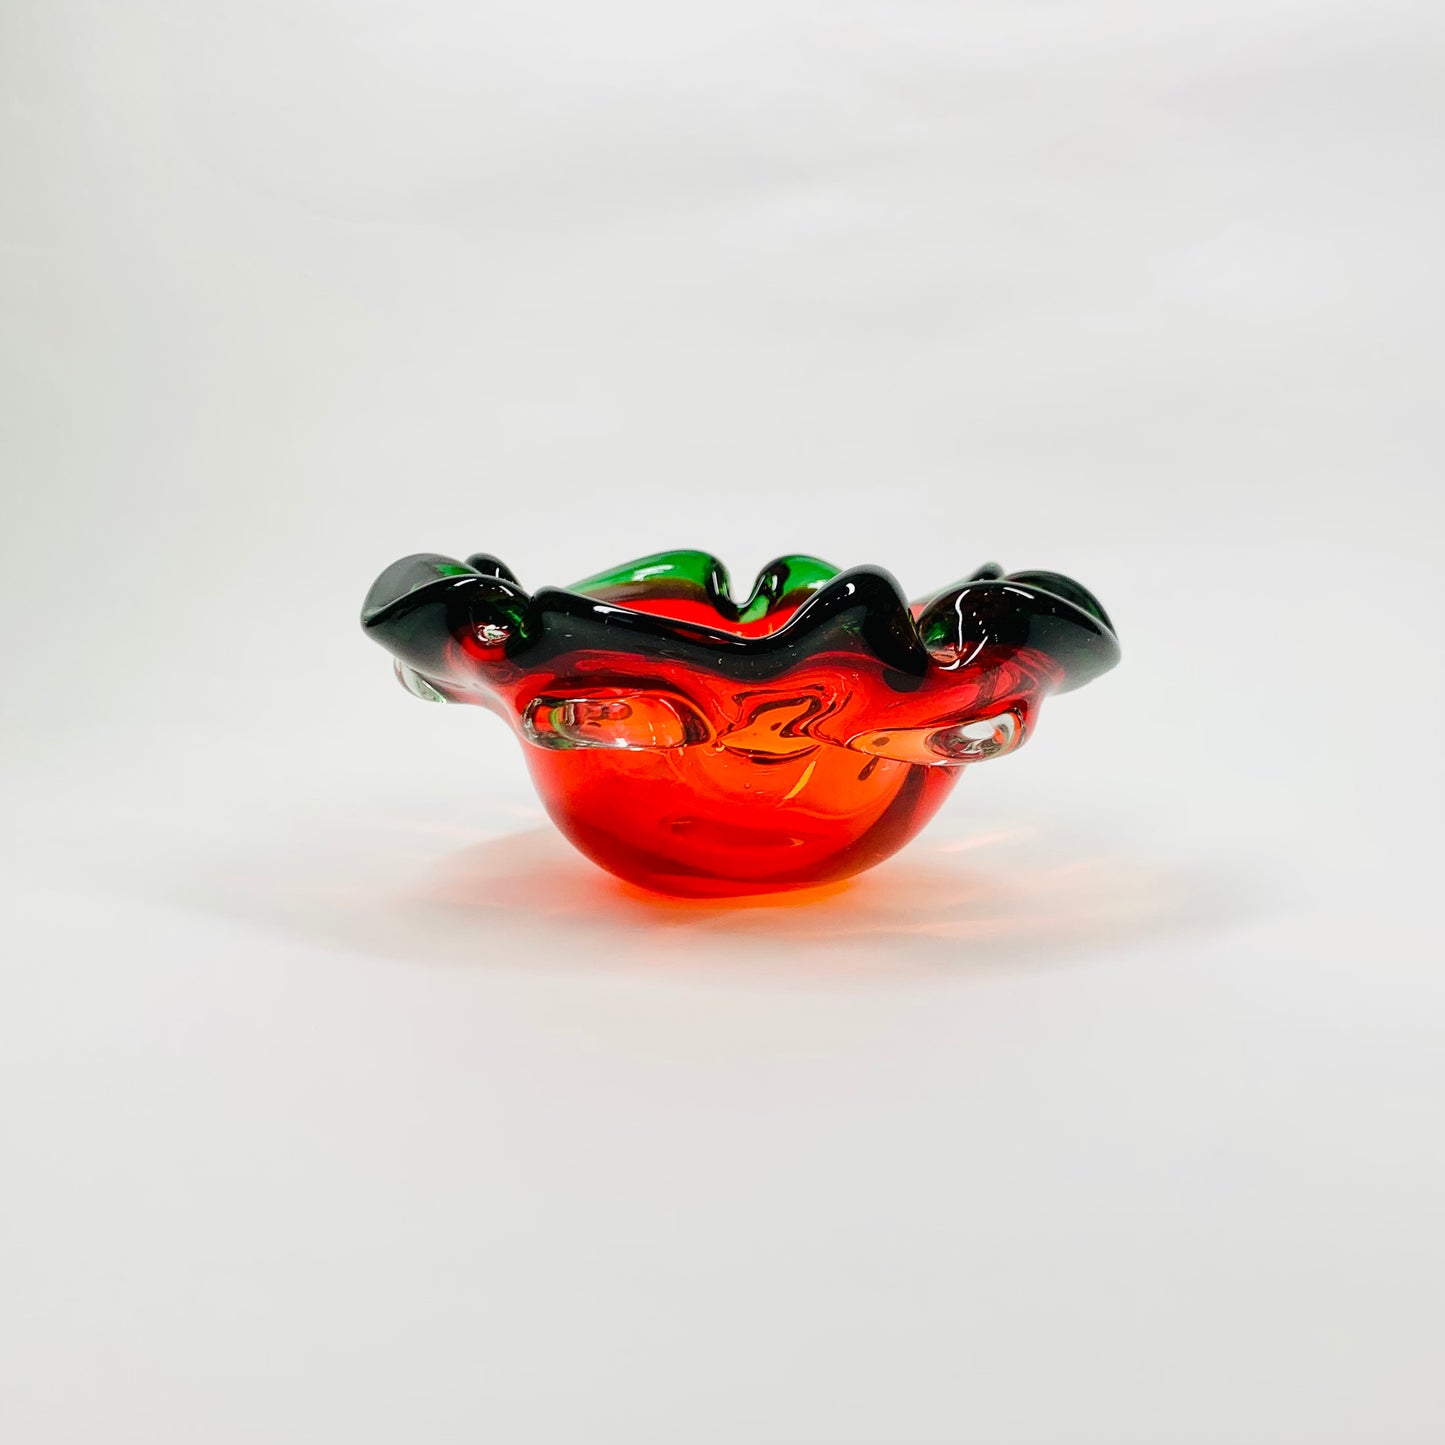 Large 1970s Japanese red ombré petal glass ashtray with green rim